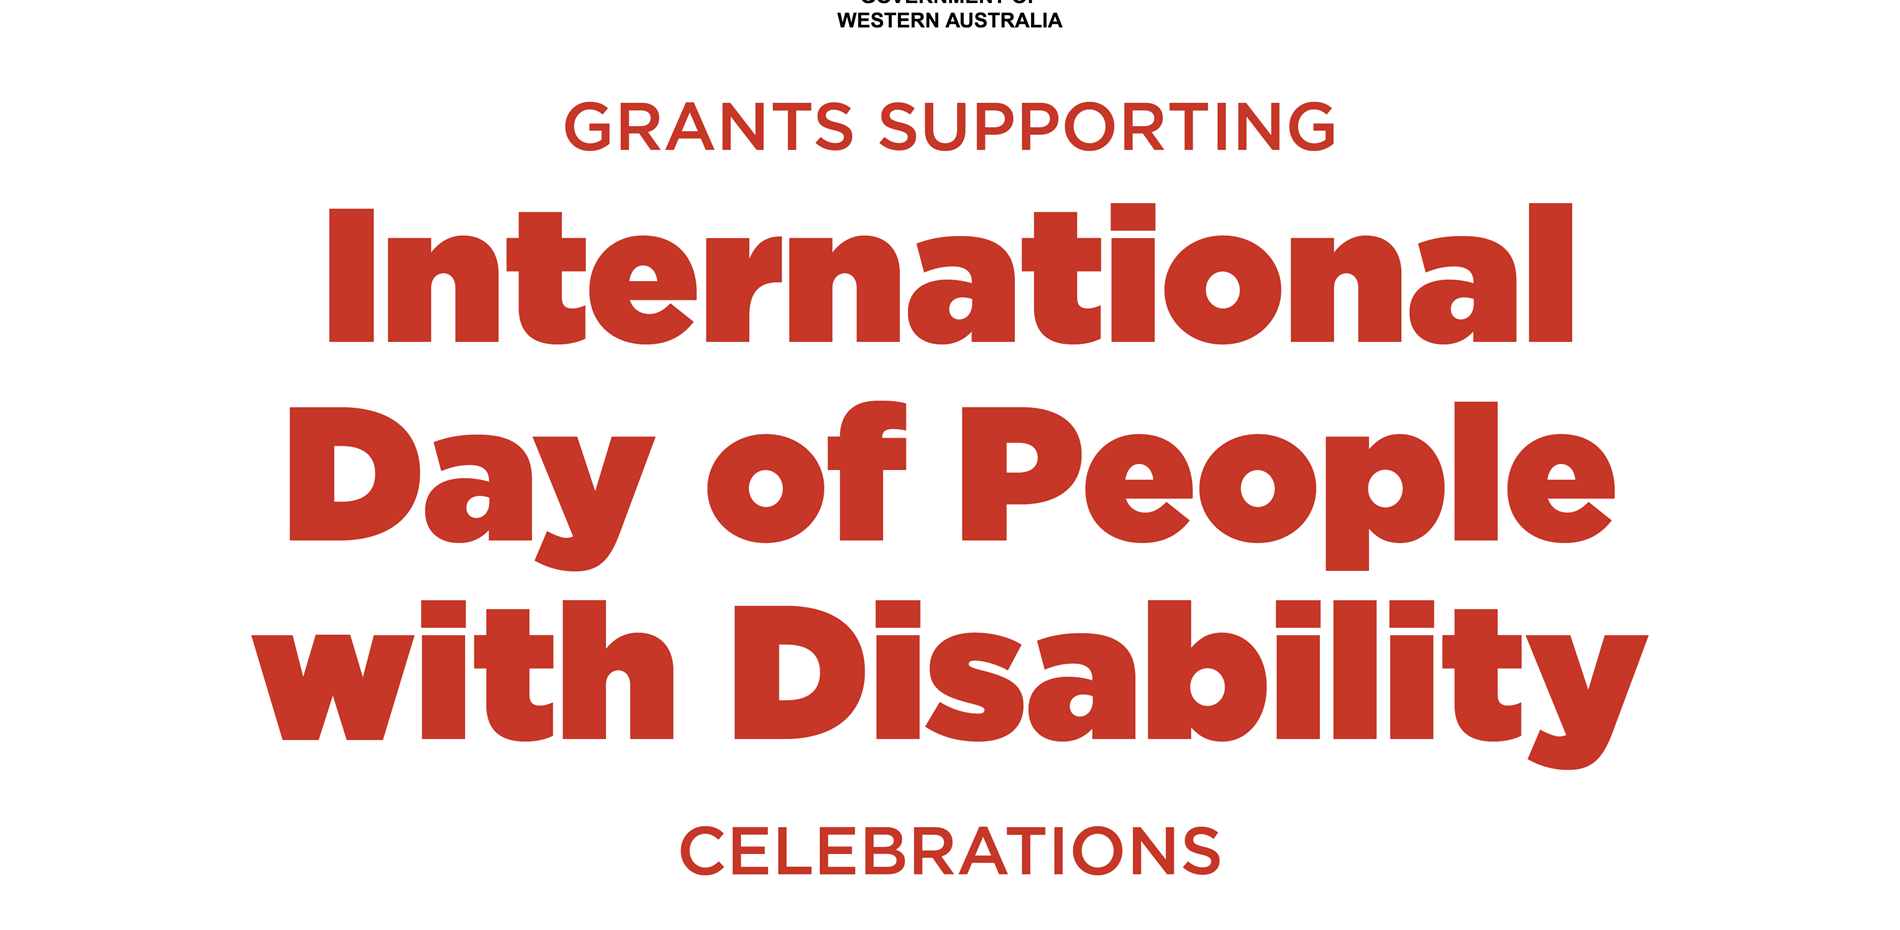 $1,000 Grant to Mark International Day of People with Disability Main Image